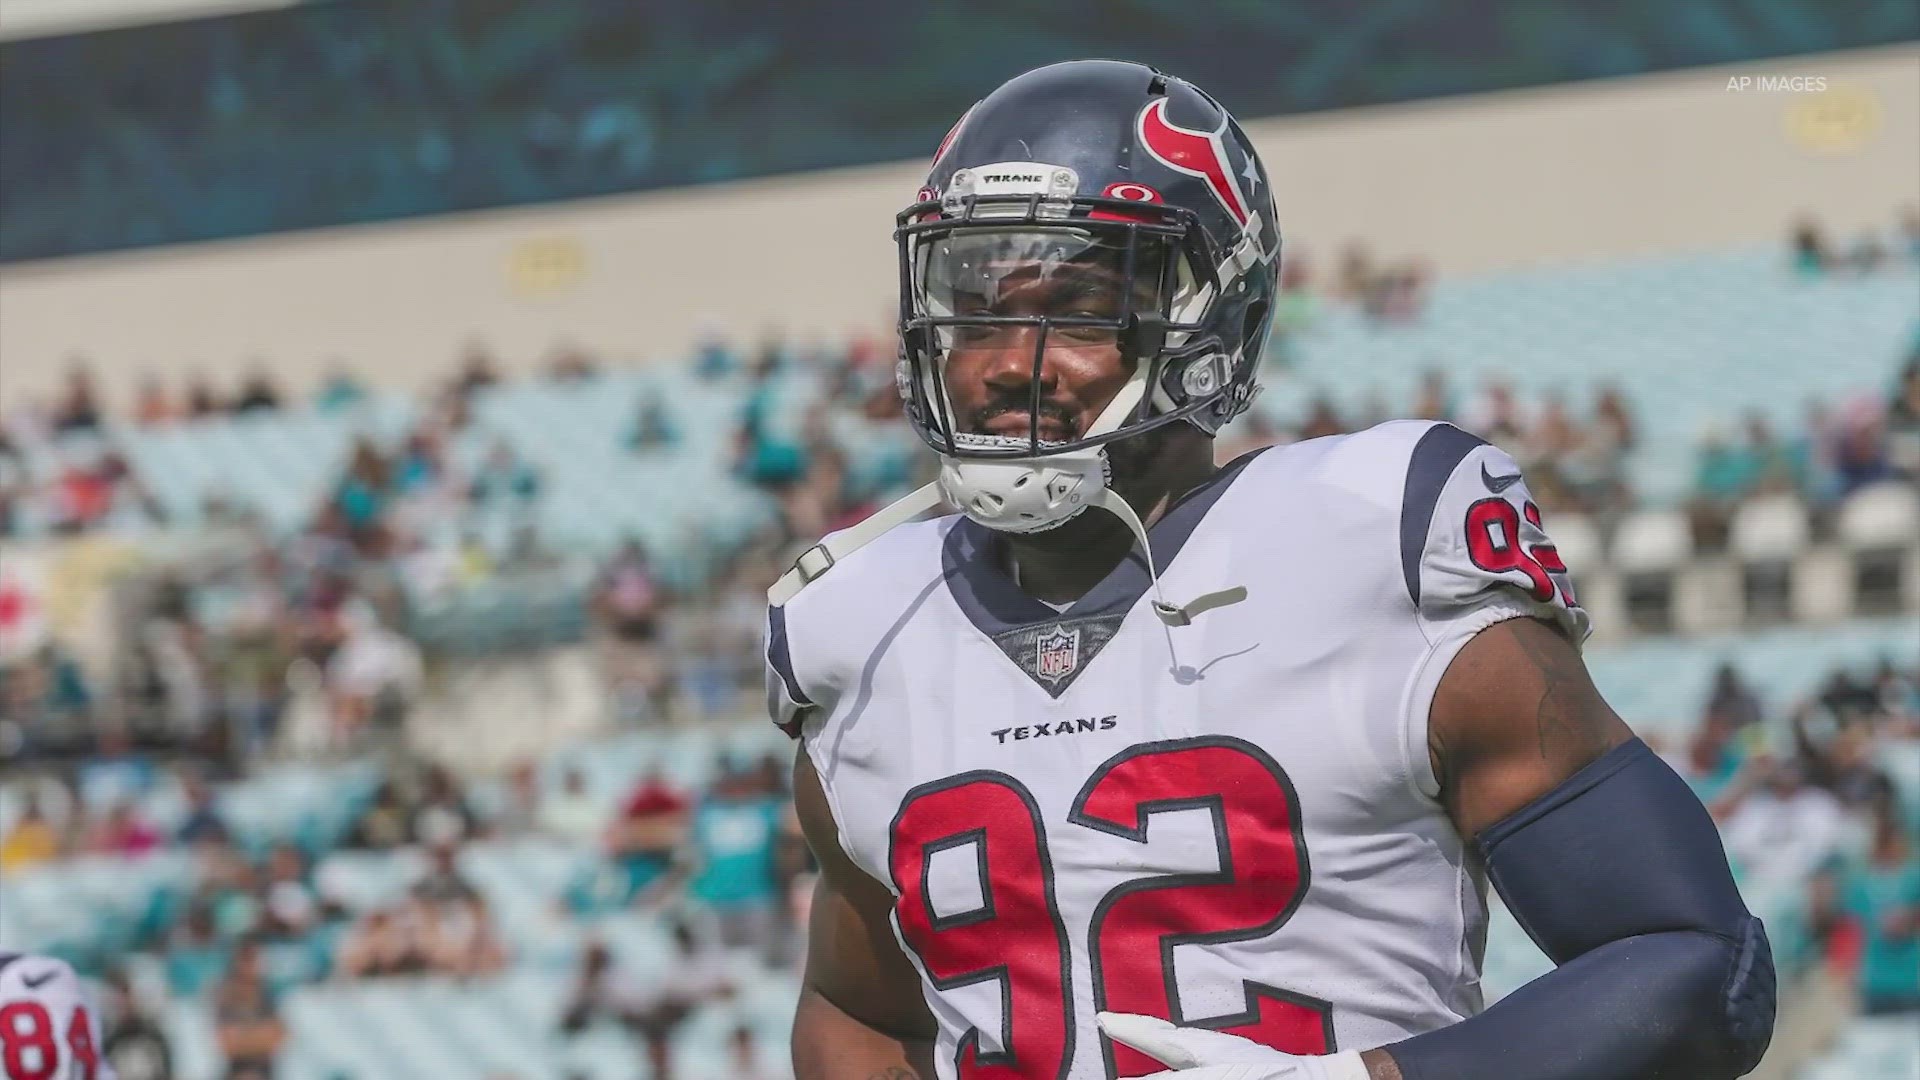 The NFL community is mourning the loss of former NFL player Chris Smith, who last played during the 2021 season for the Houston Texans.